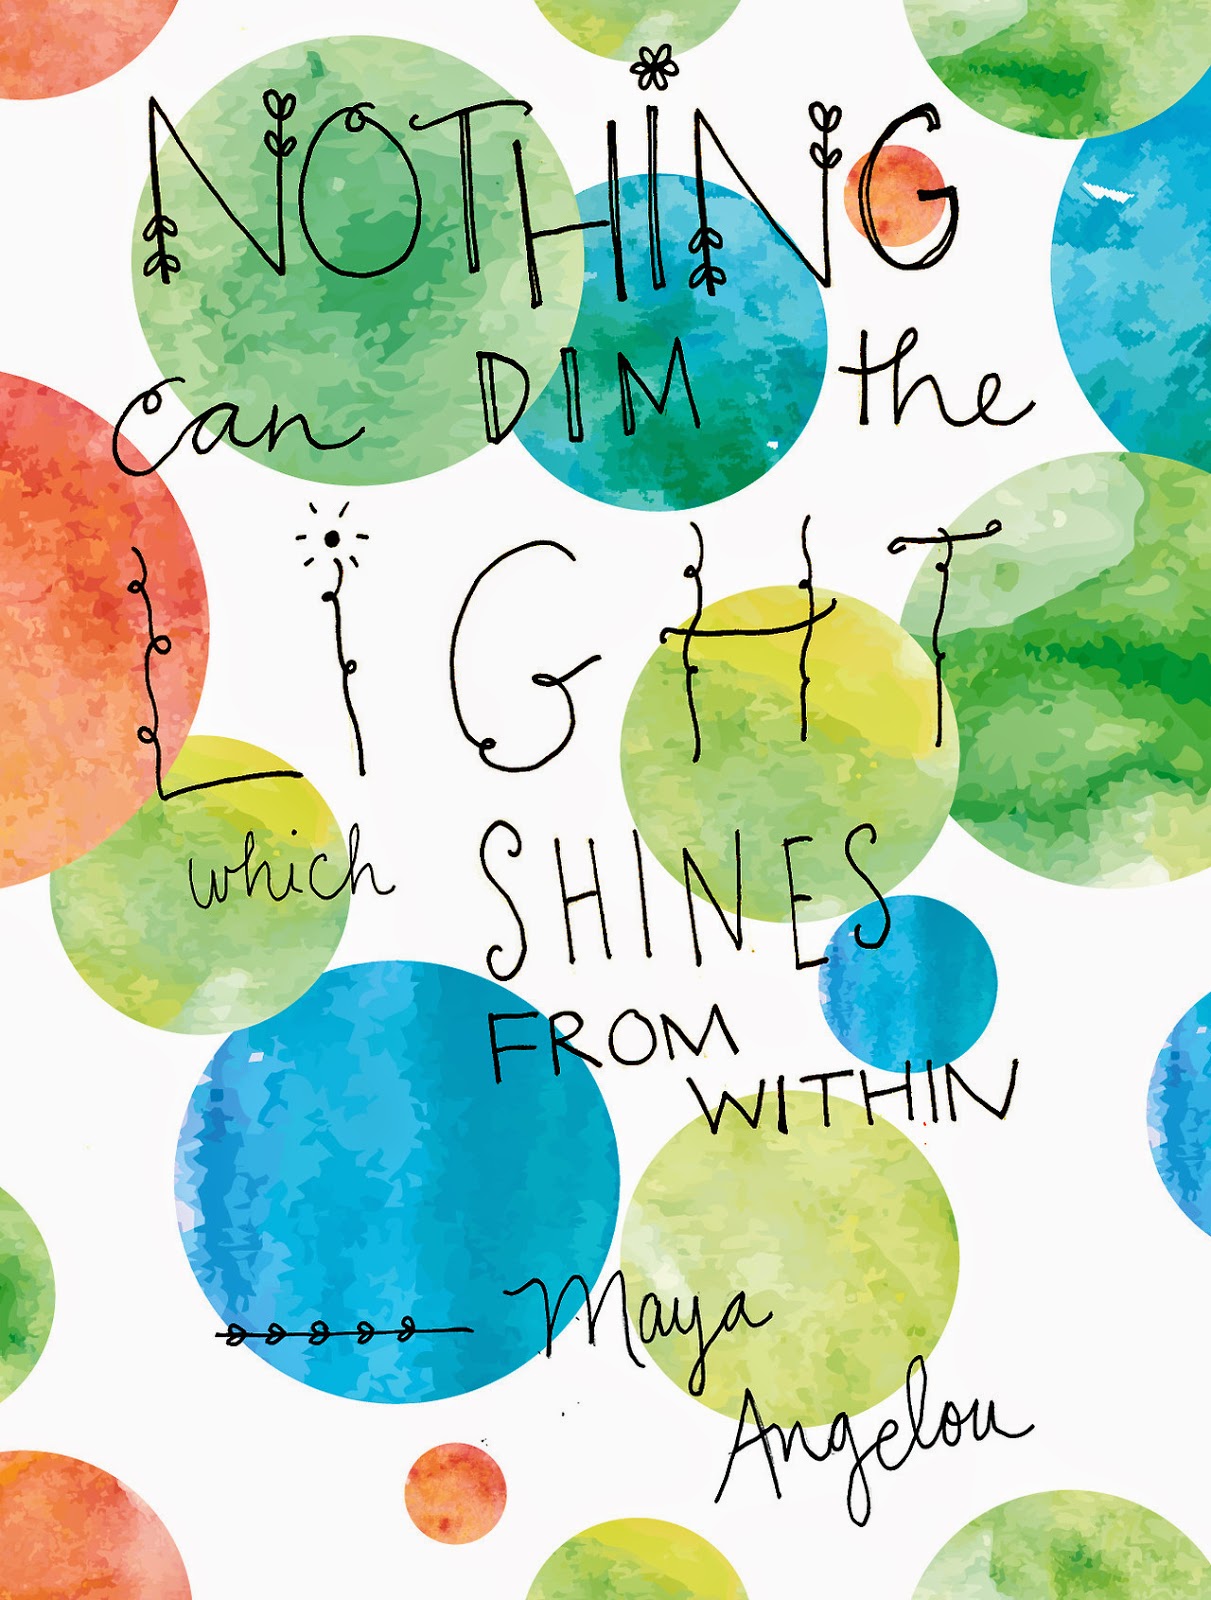 maya angelou quote "nothing can dim the light which shines from within"